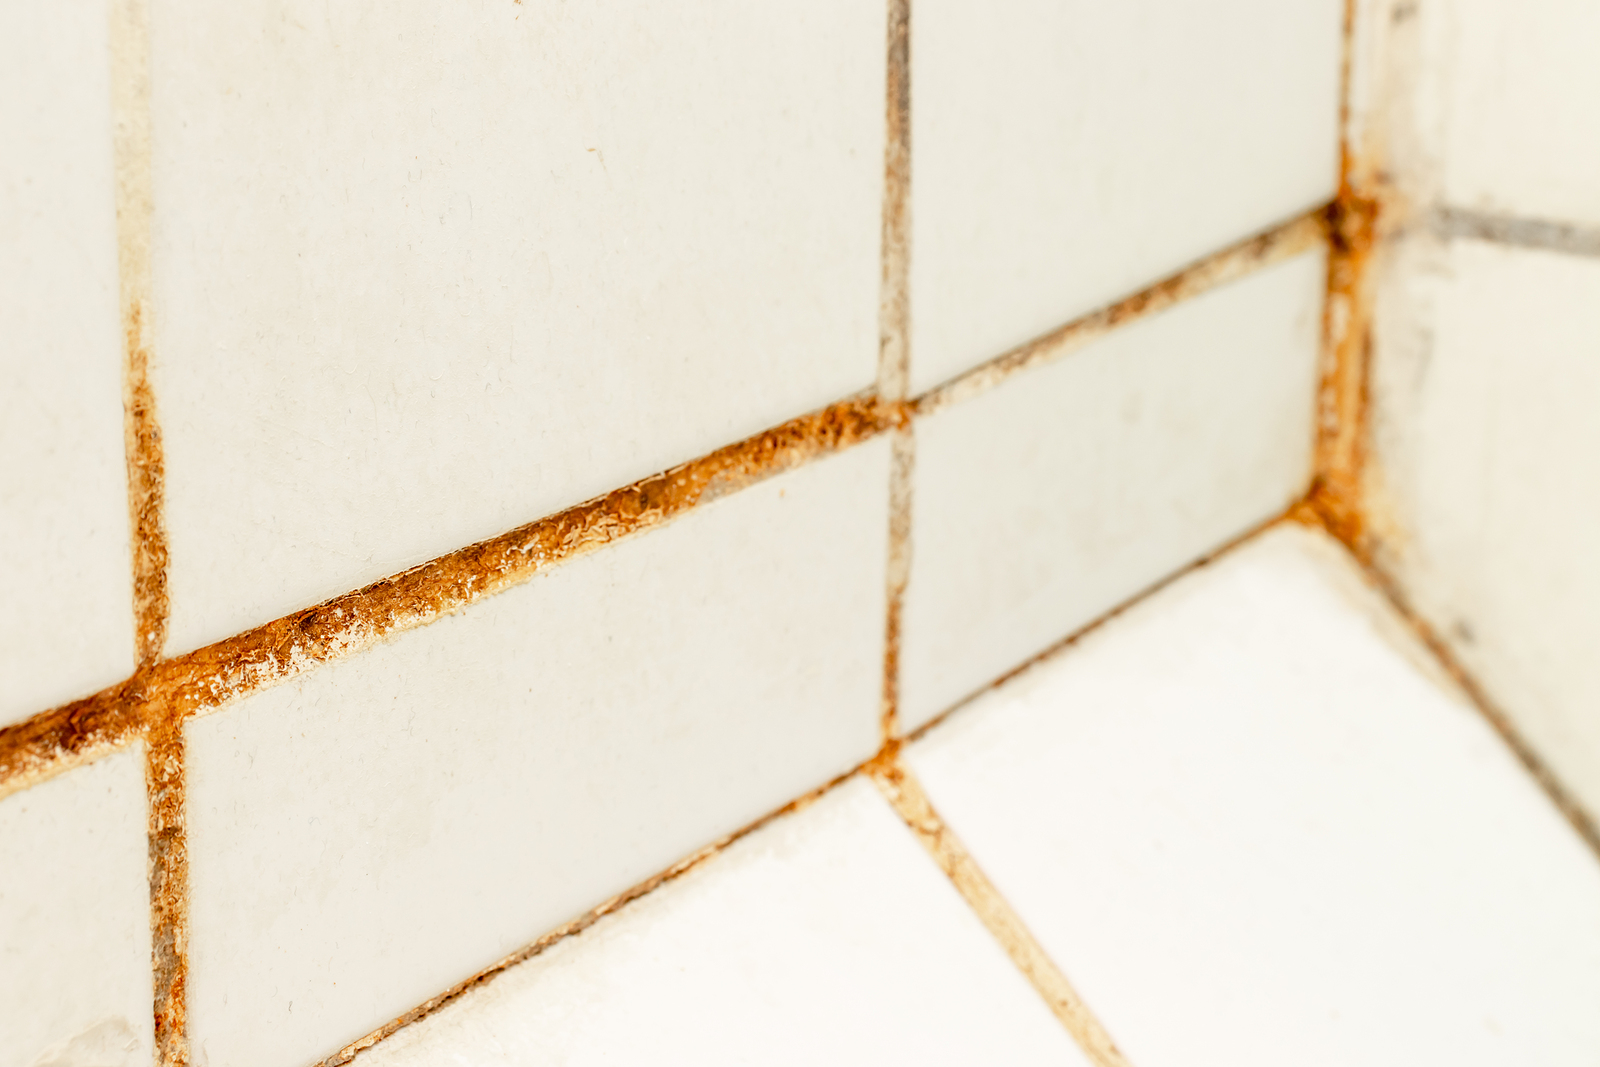 How To Clean Rust Out Of Grout, How To Clean Badly Stained Tile Grout